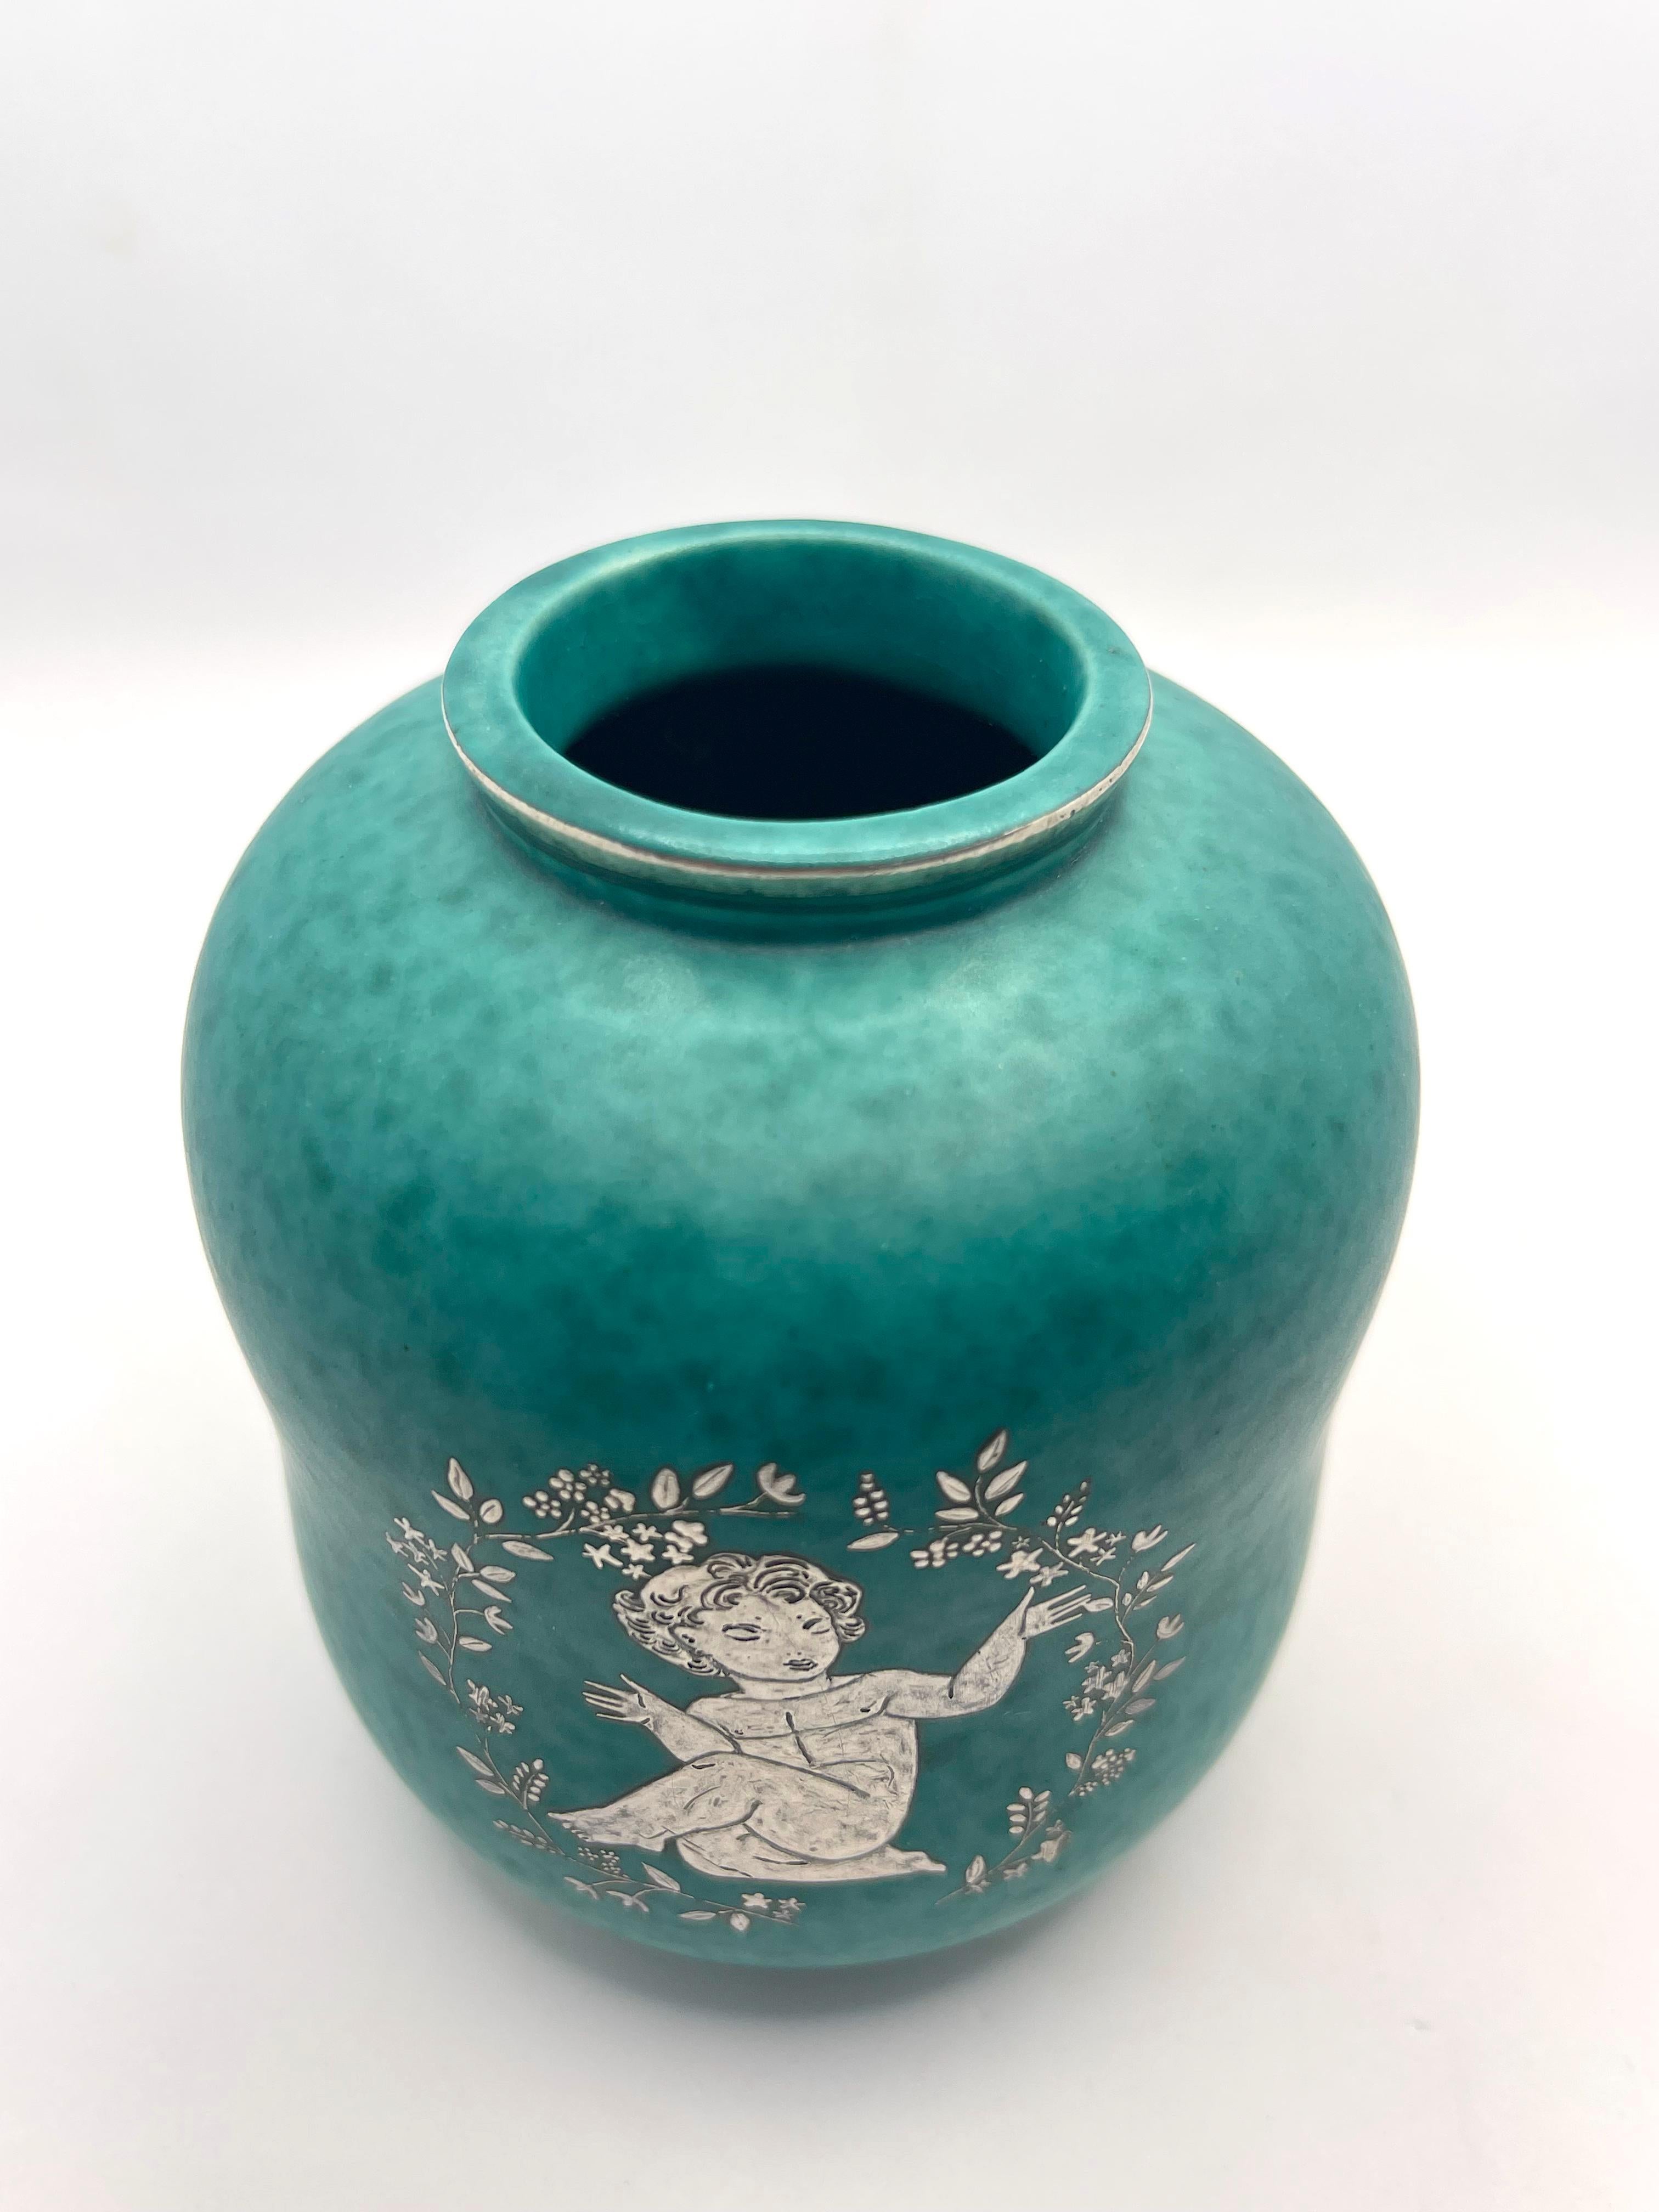 Vase by Wilhelm Kage made by Gustavsberg in Sweden around 1950 figuring silver inlay figuring an angel with stylised flower. Signed GUSTAVSBERG ARGENTA with anchor 1079
Good condition

Wilhelm Kåge (1889-1960) is one of the most well-known